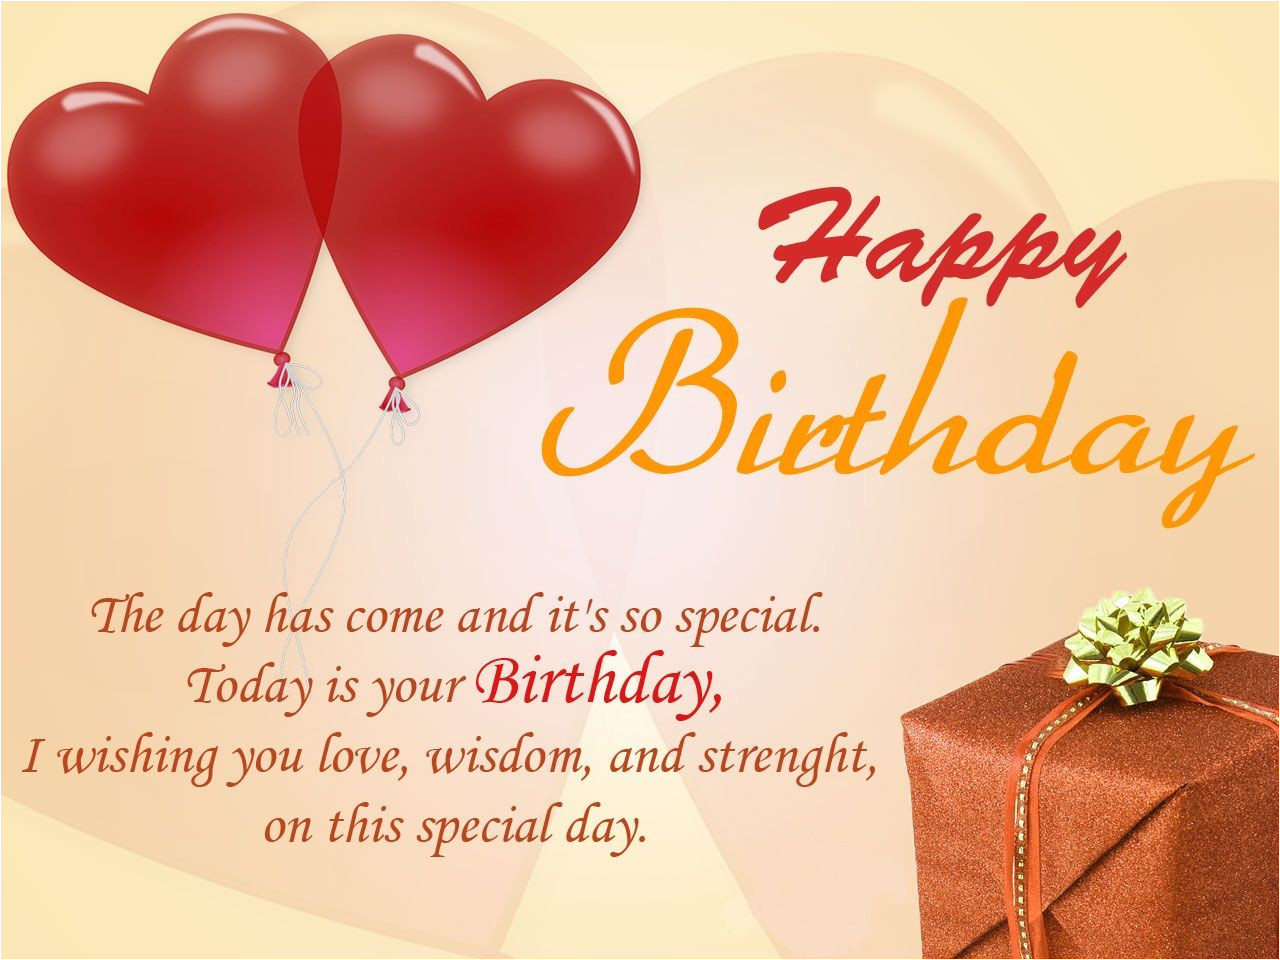 Happy Birthday Husband Card Message 27 Images Happy Birthday Wishes Quotes for Husband and Best